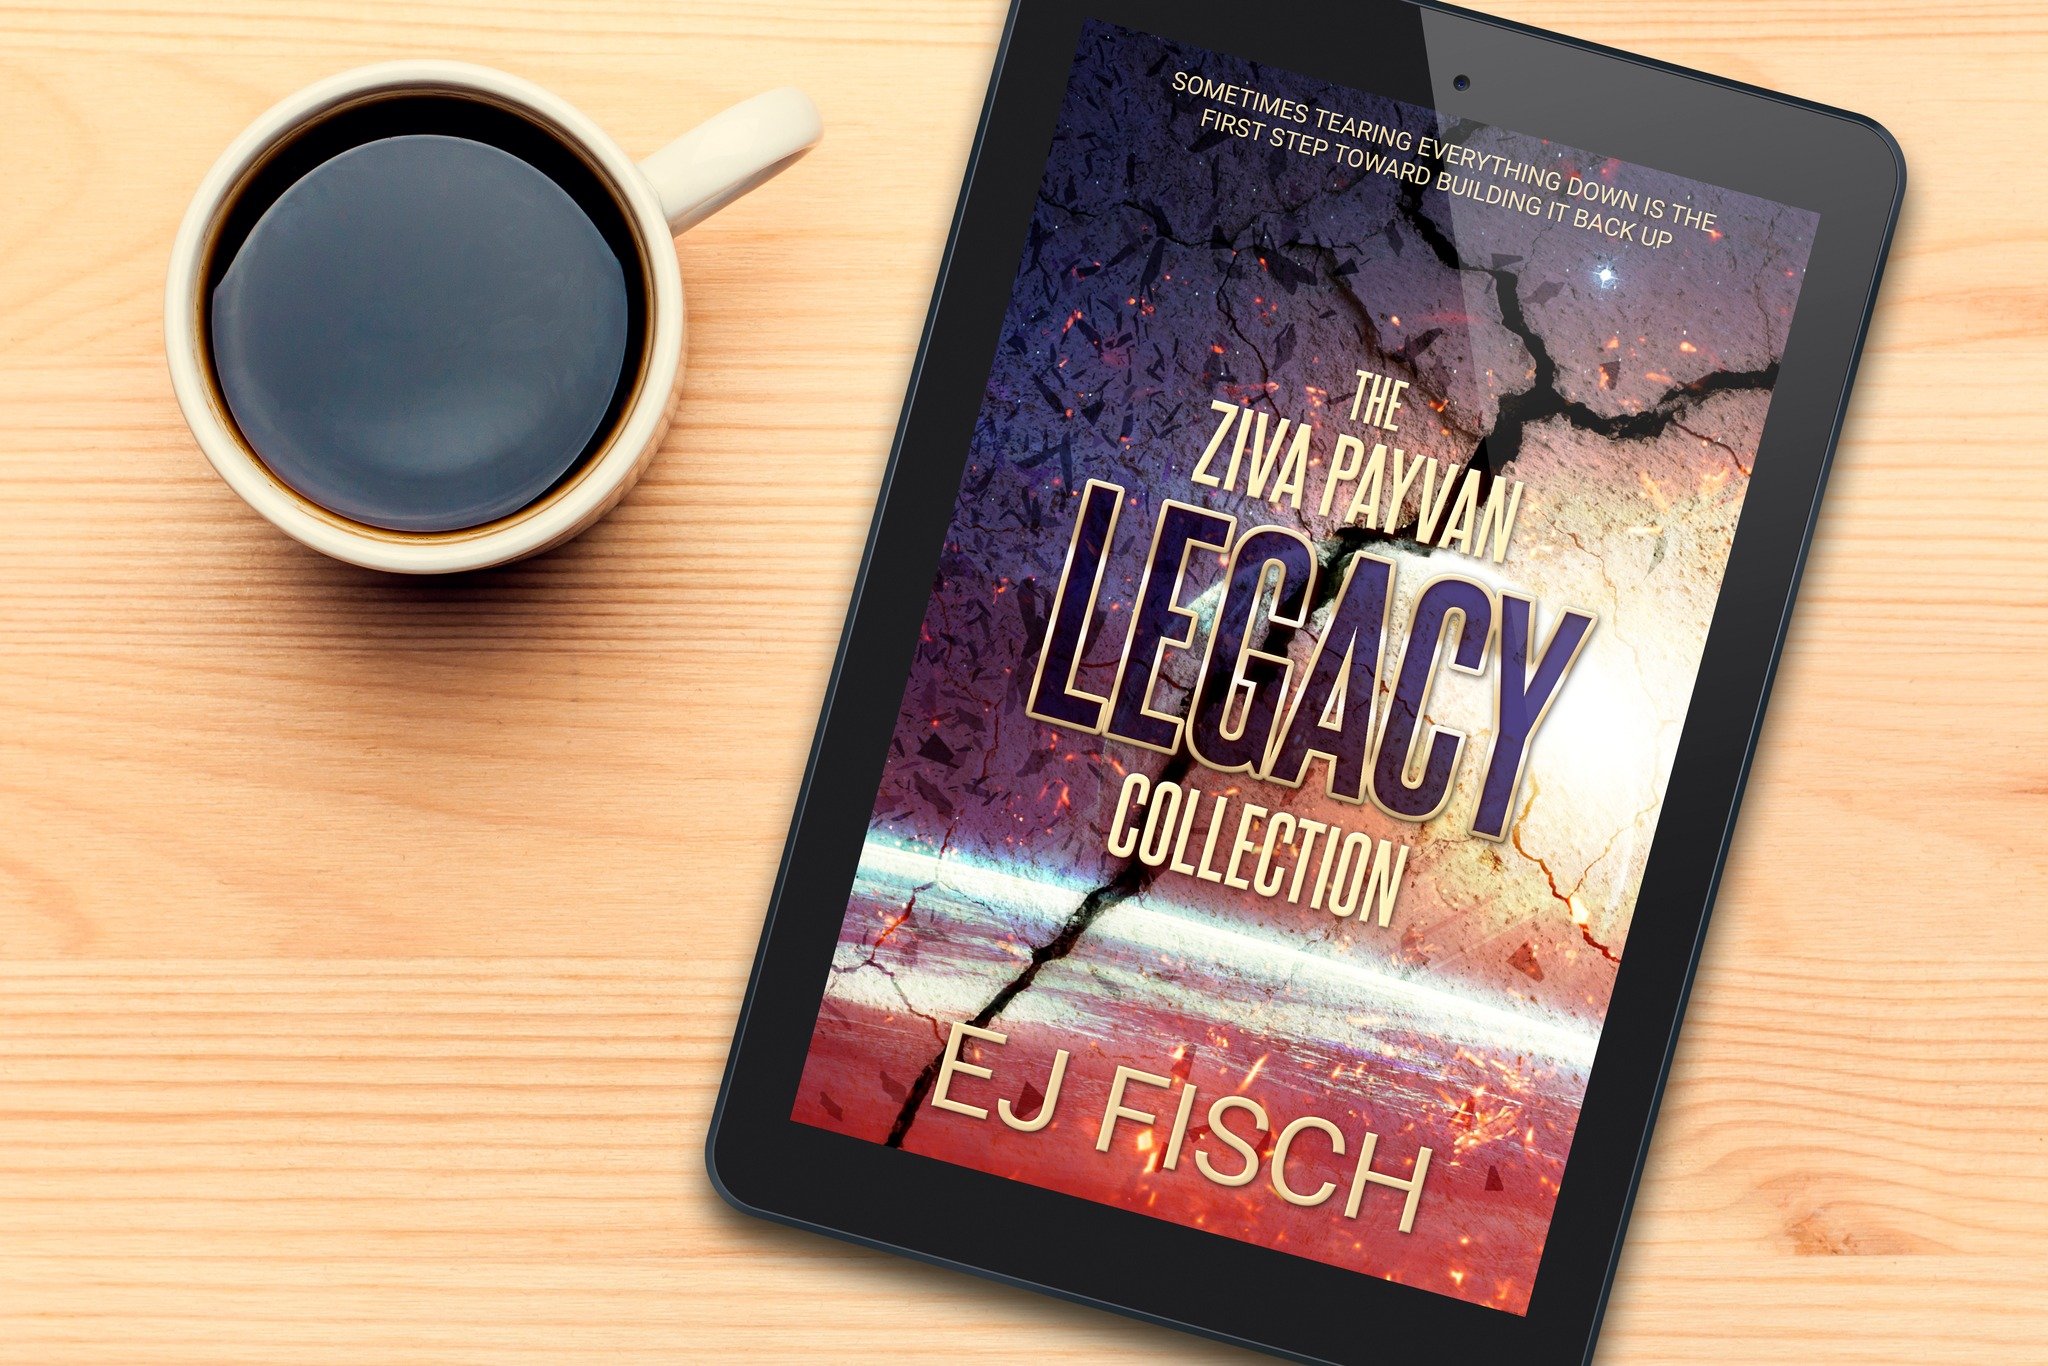 In case you also missed THIS in my newsletter, I now have an ebook bundle available that includes both Fracture and Embers, plus a little bonus content! 🙌🏼

Learn more at ✨ejfisch.com/collections✨

Find a retailer:
✨books2read.com/ziva-payvan-legac